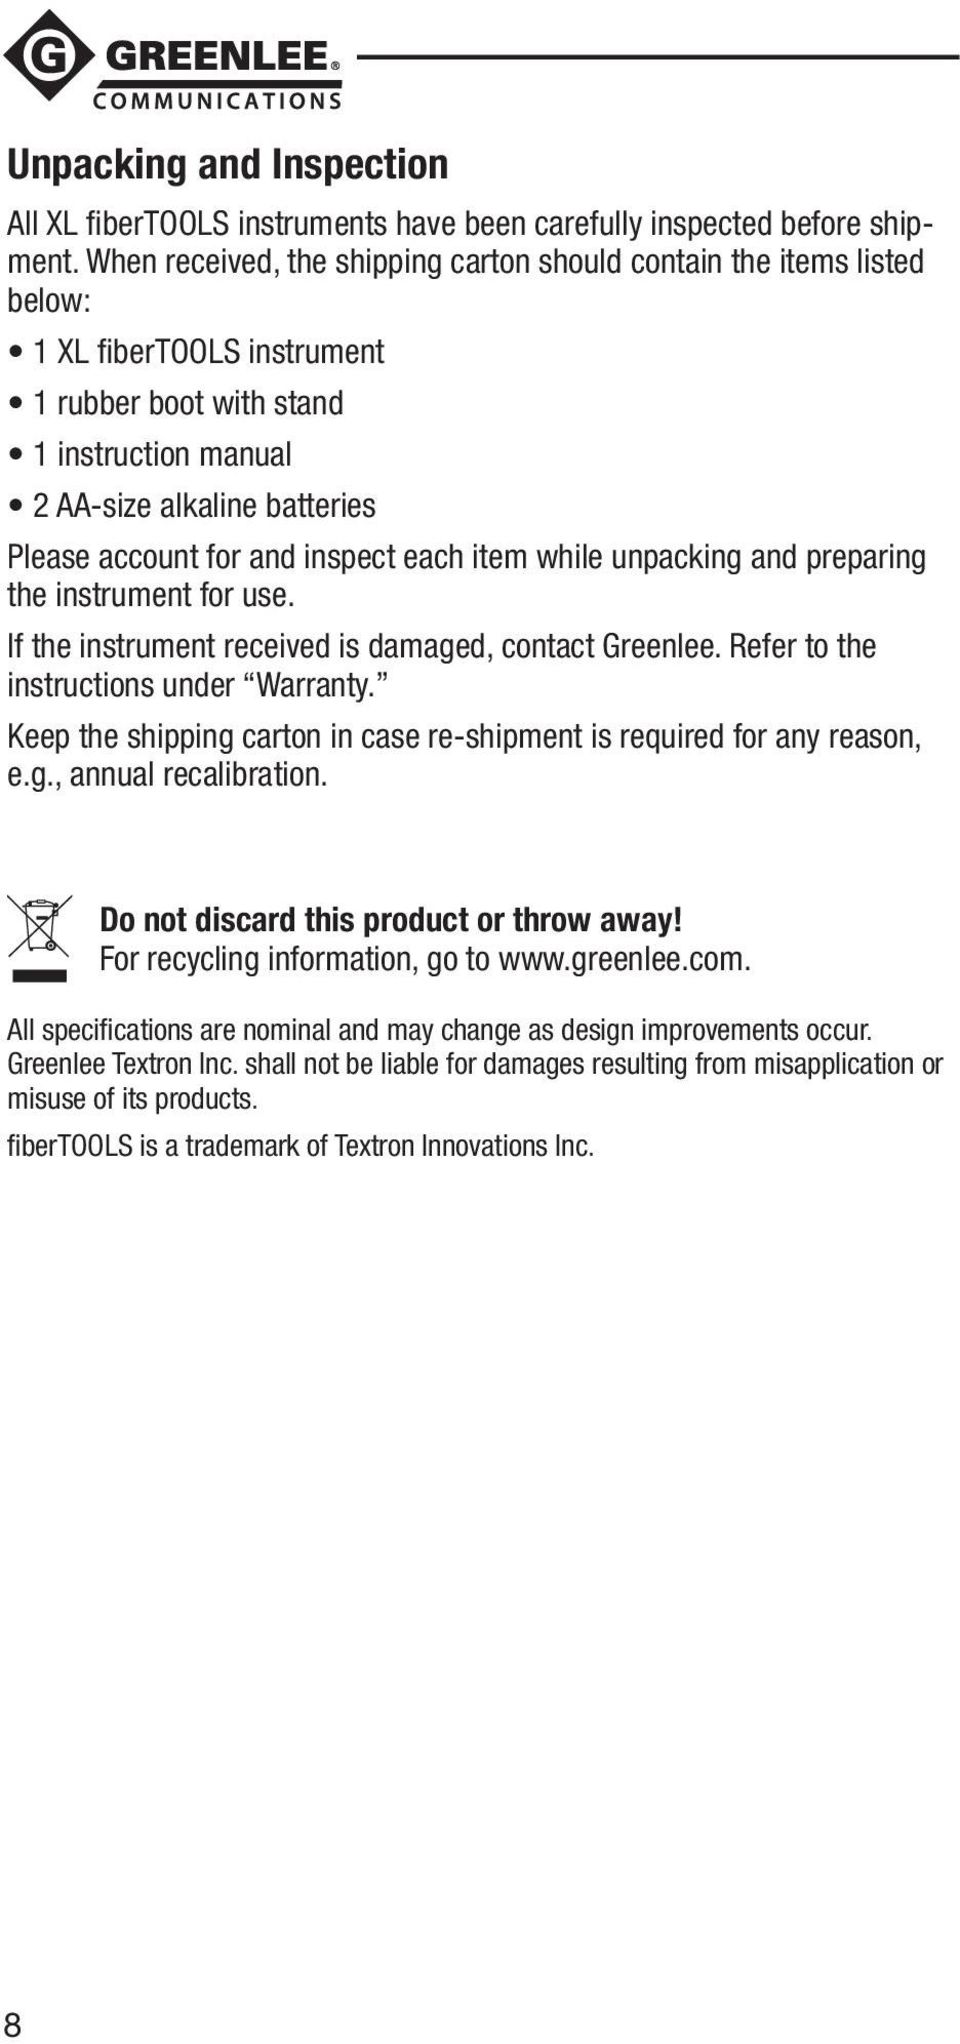 inspect each item while unpacking and preparing the instrument for use. If the instrument received is damaged, contact Greenlee. Refer to the instructions under Warranty.